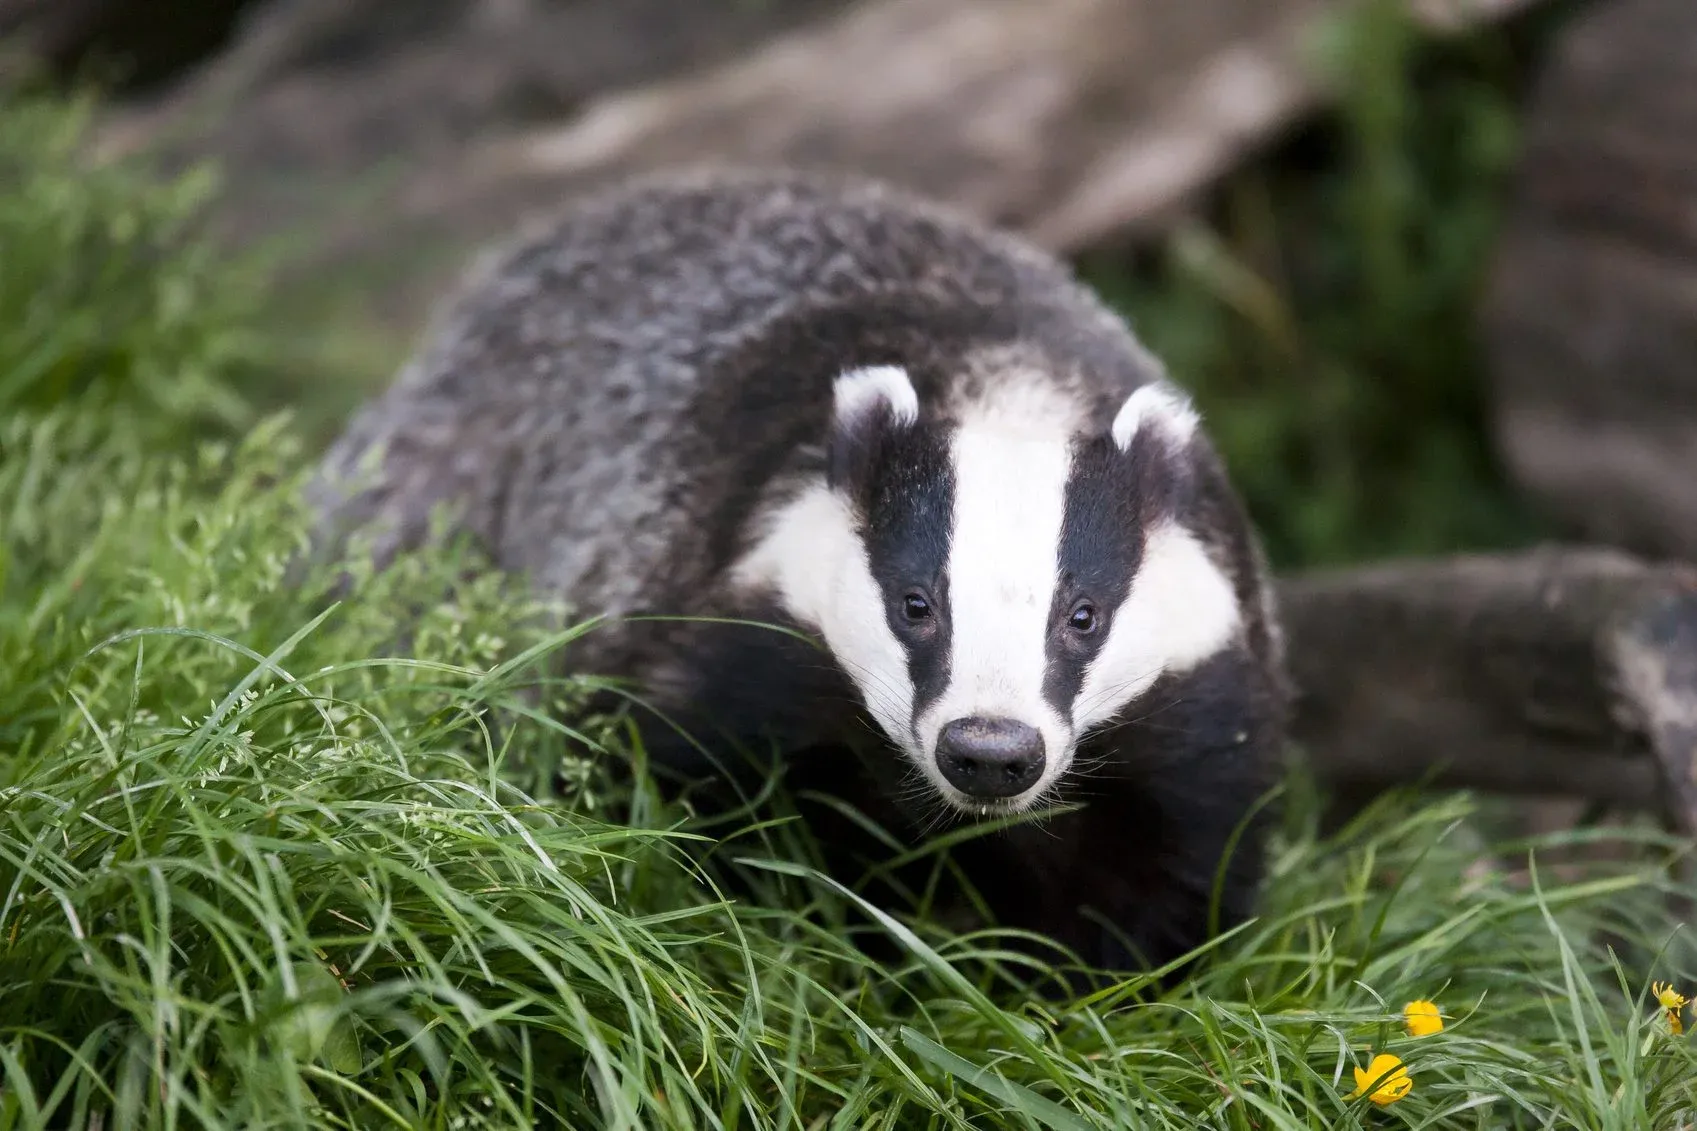 Photo of a Badger in green grass